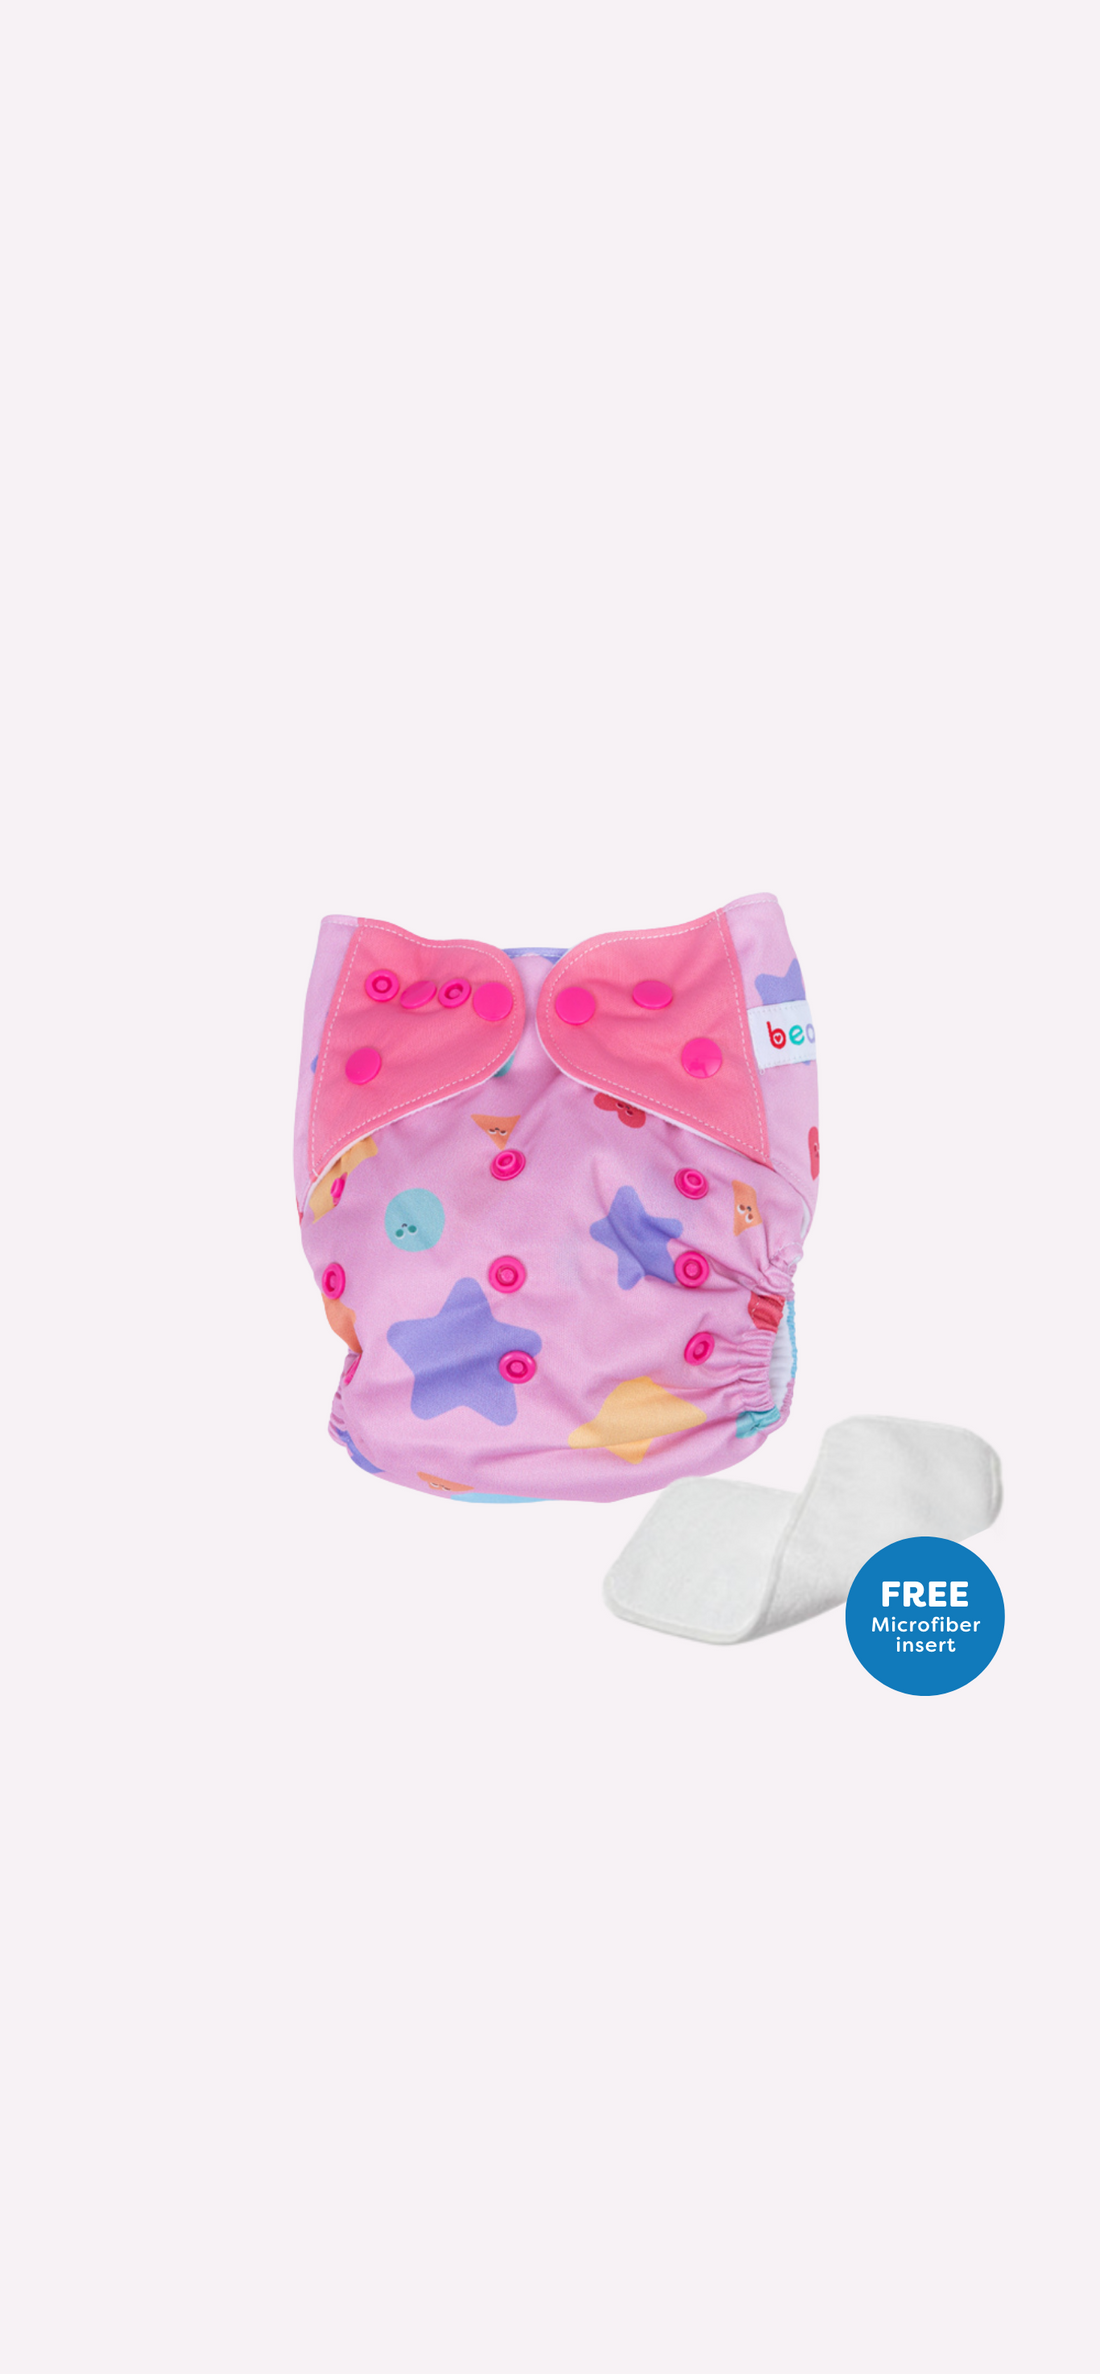 Snappies Little Bean Playful Pink Cloth Diaper